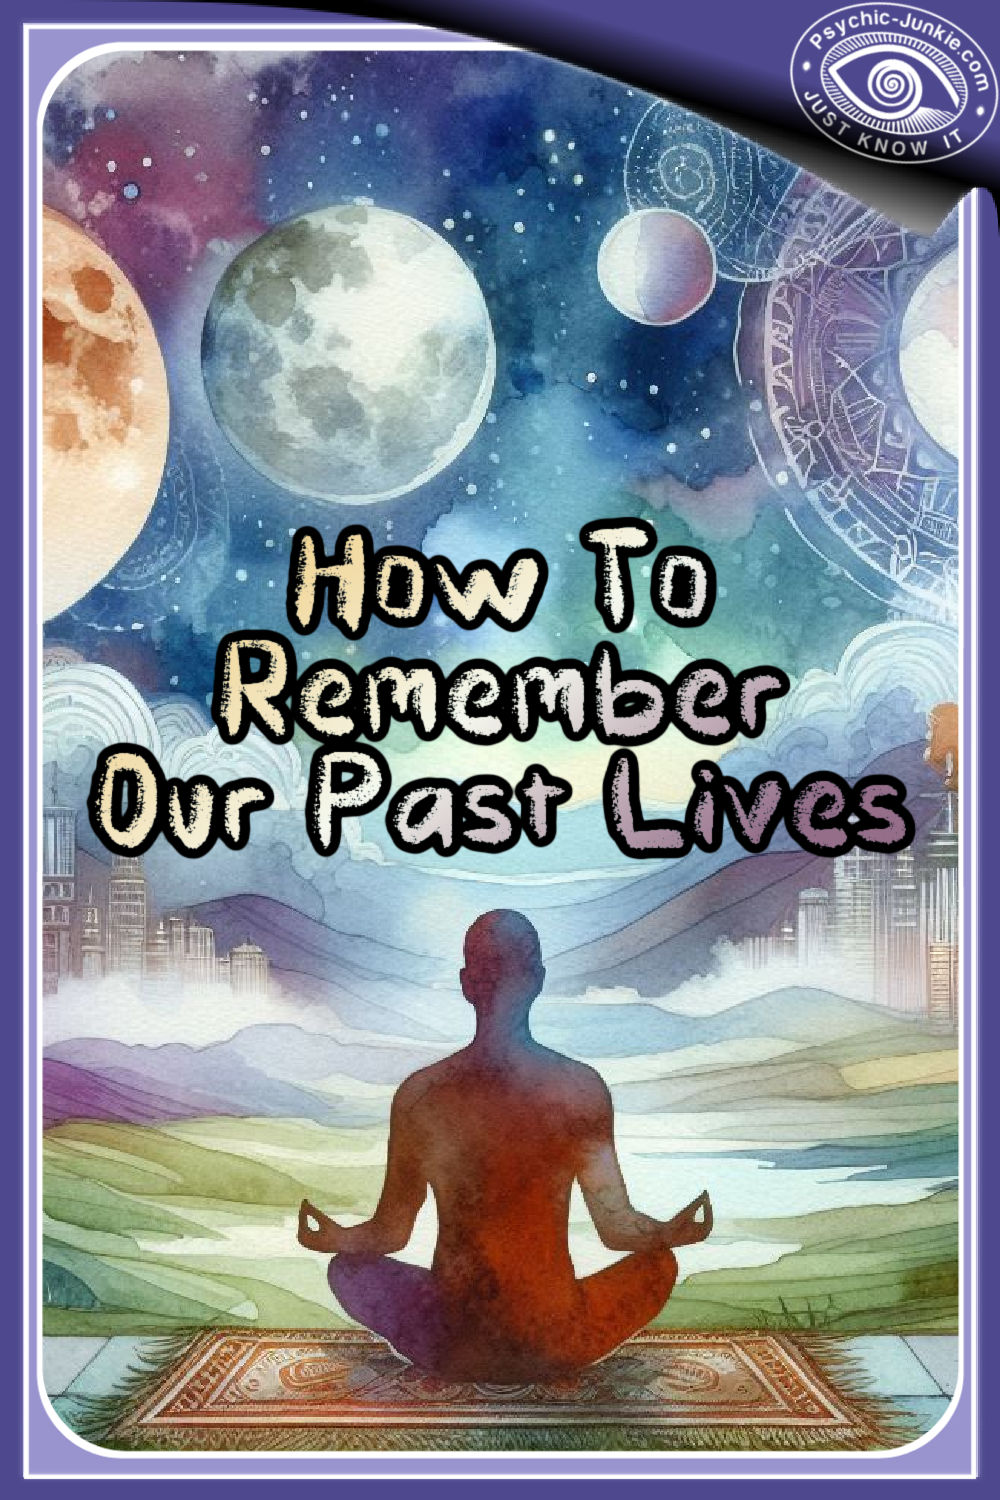 Can We Remember Past Lives?